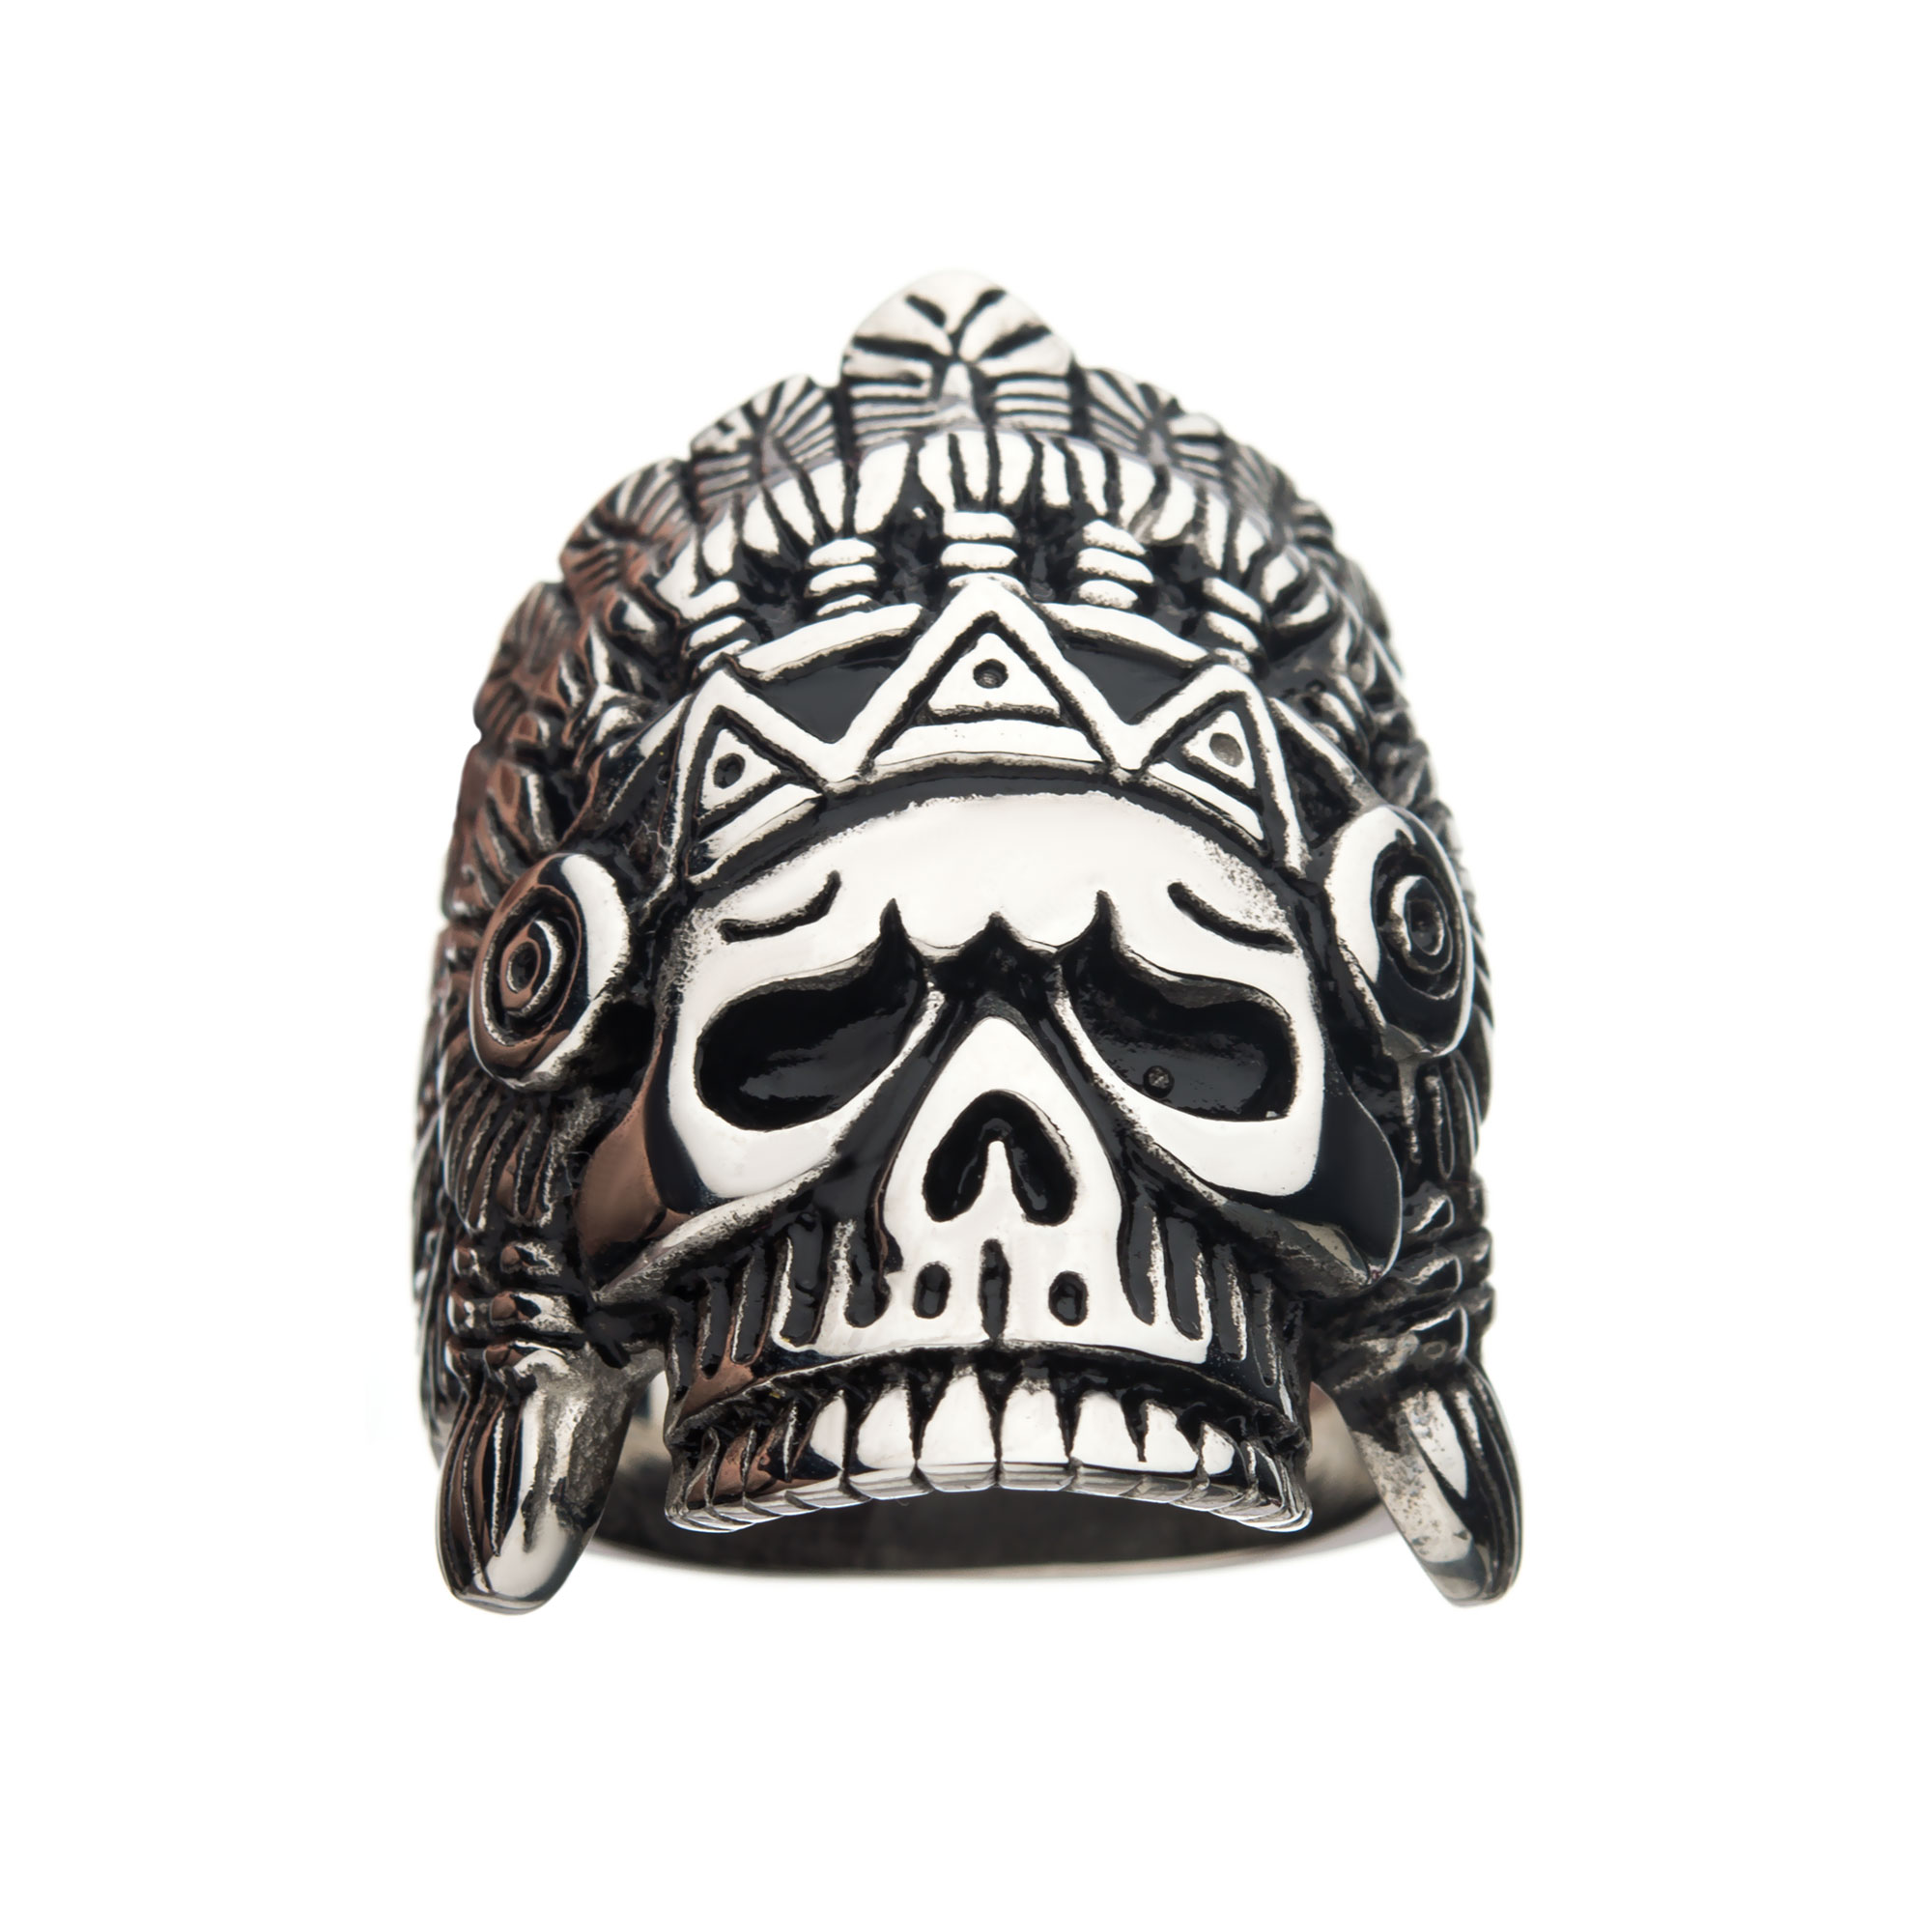 Oxidized Stainless Steel Chief Skull Ring Image 2 Lee Ann's Fine Jewelry Russellville, AR